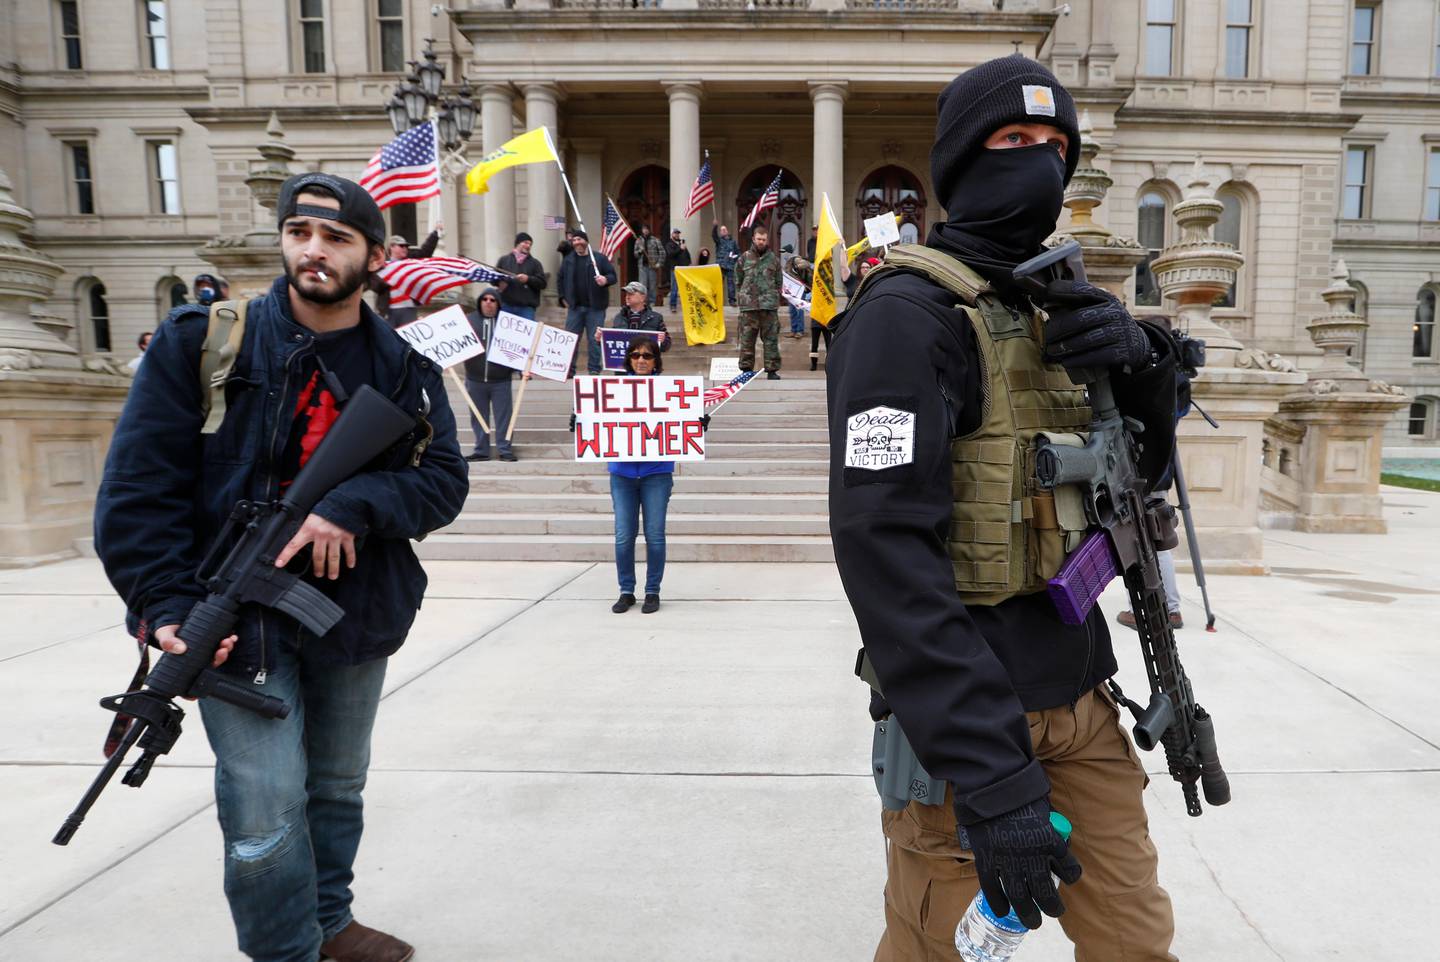 FILE - In this April 15, 2020, file photo, protesters carry rifles near the steps of the Michigan State Capitol building in Lansing, Mich. Many African Americans watching protests calling for easing restrictions meant to slow the spread of the new coronavirus see them as one more example of how their health and their rights just dont seem to matter. (AP Photo/Paul Sancya, File)